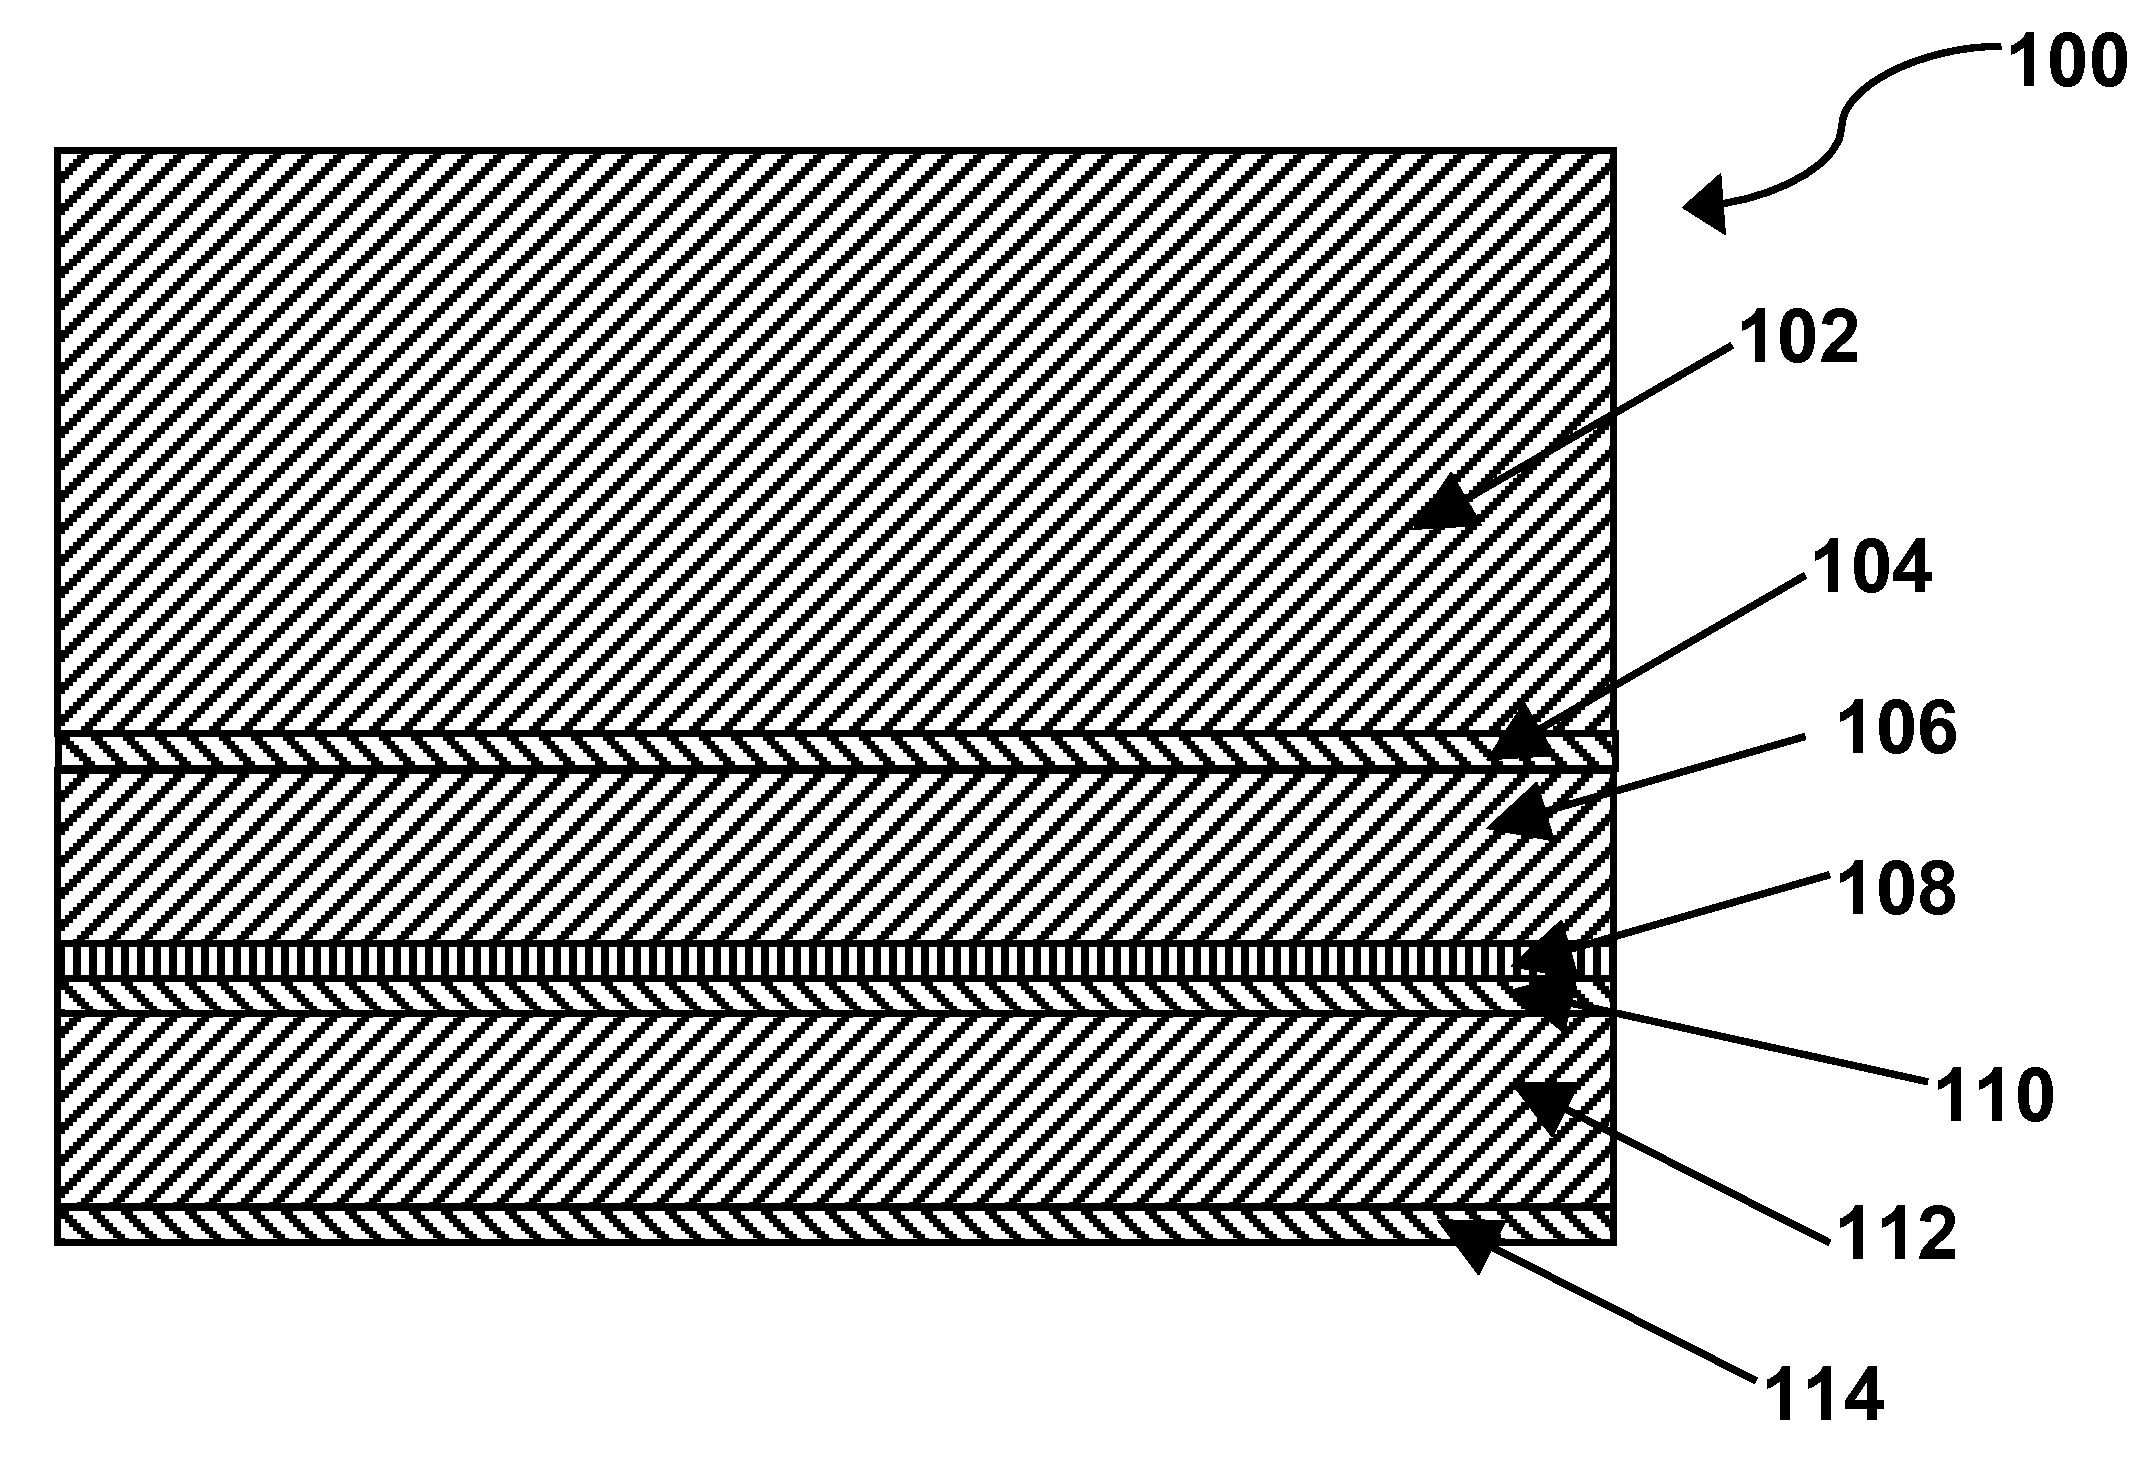 Multi-layer sheet for use in electro-optic displays